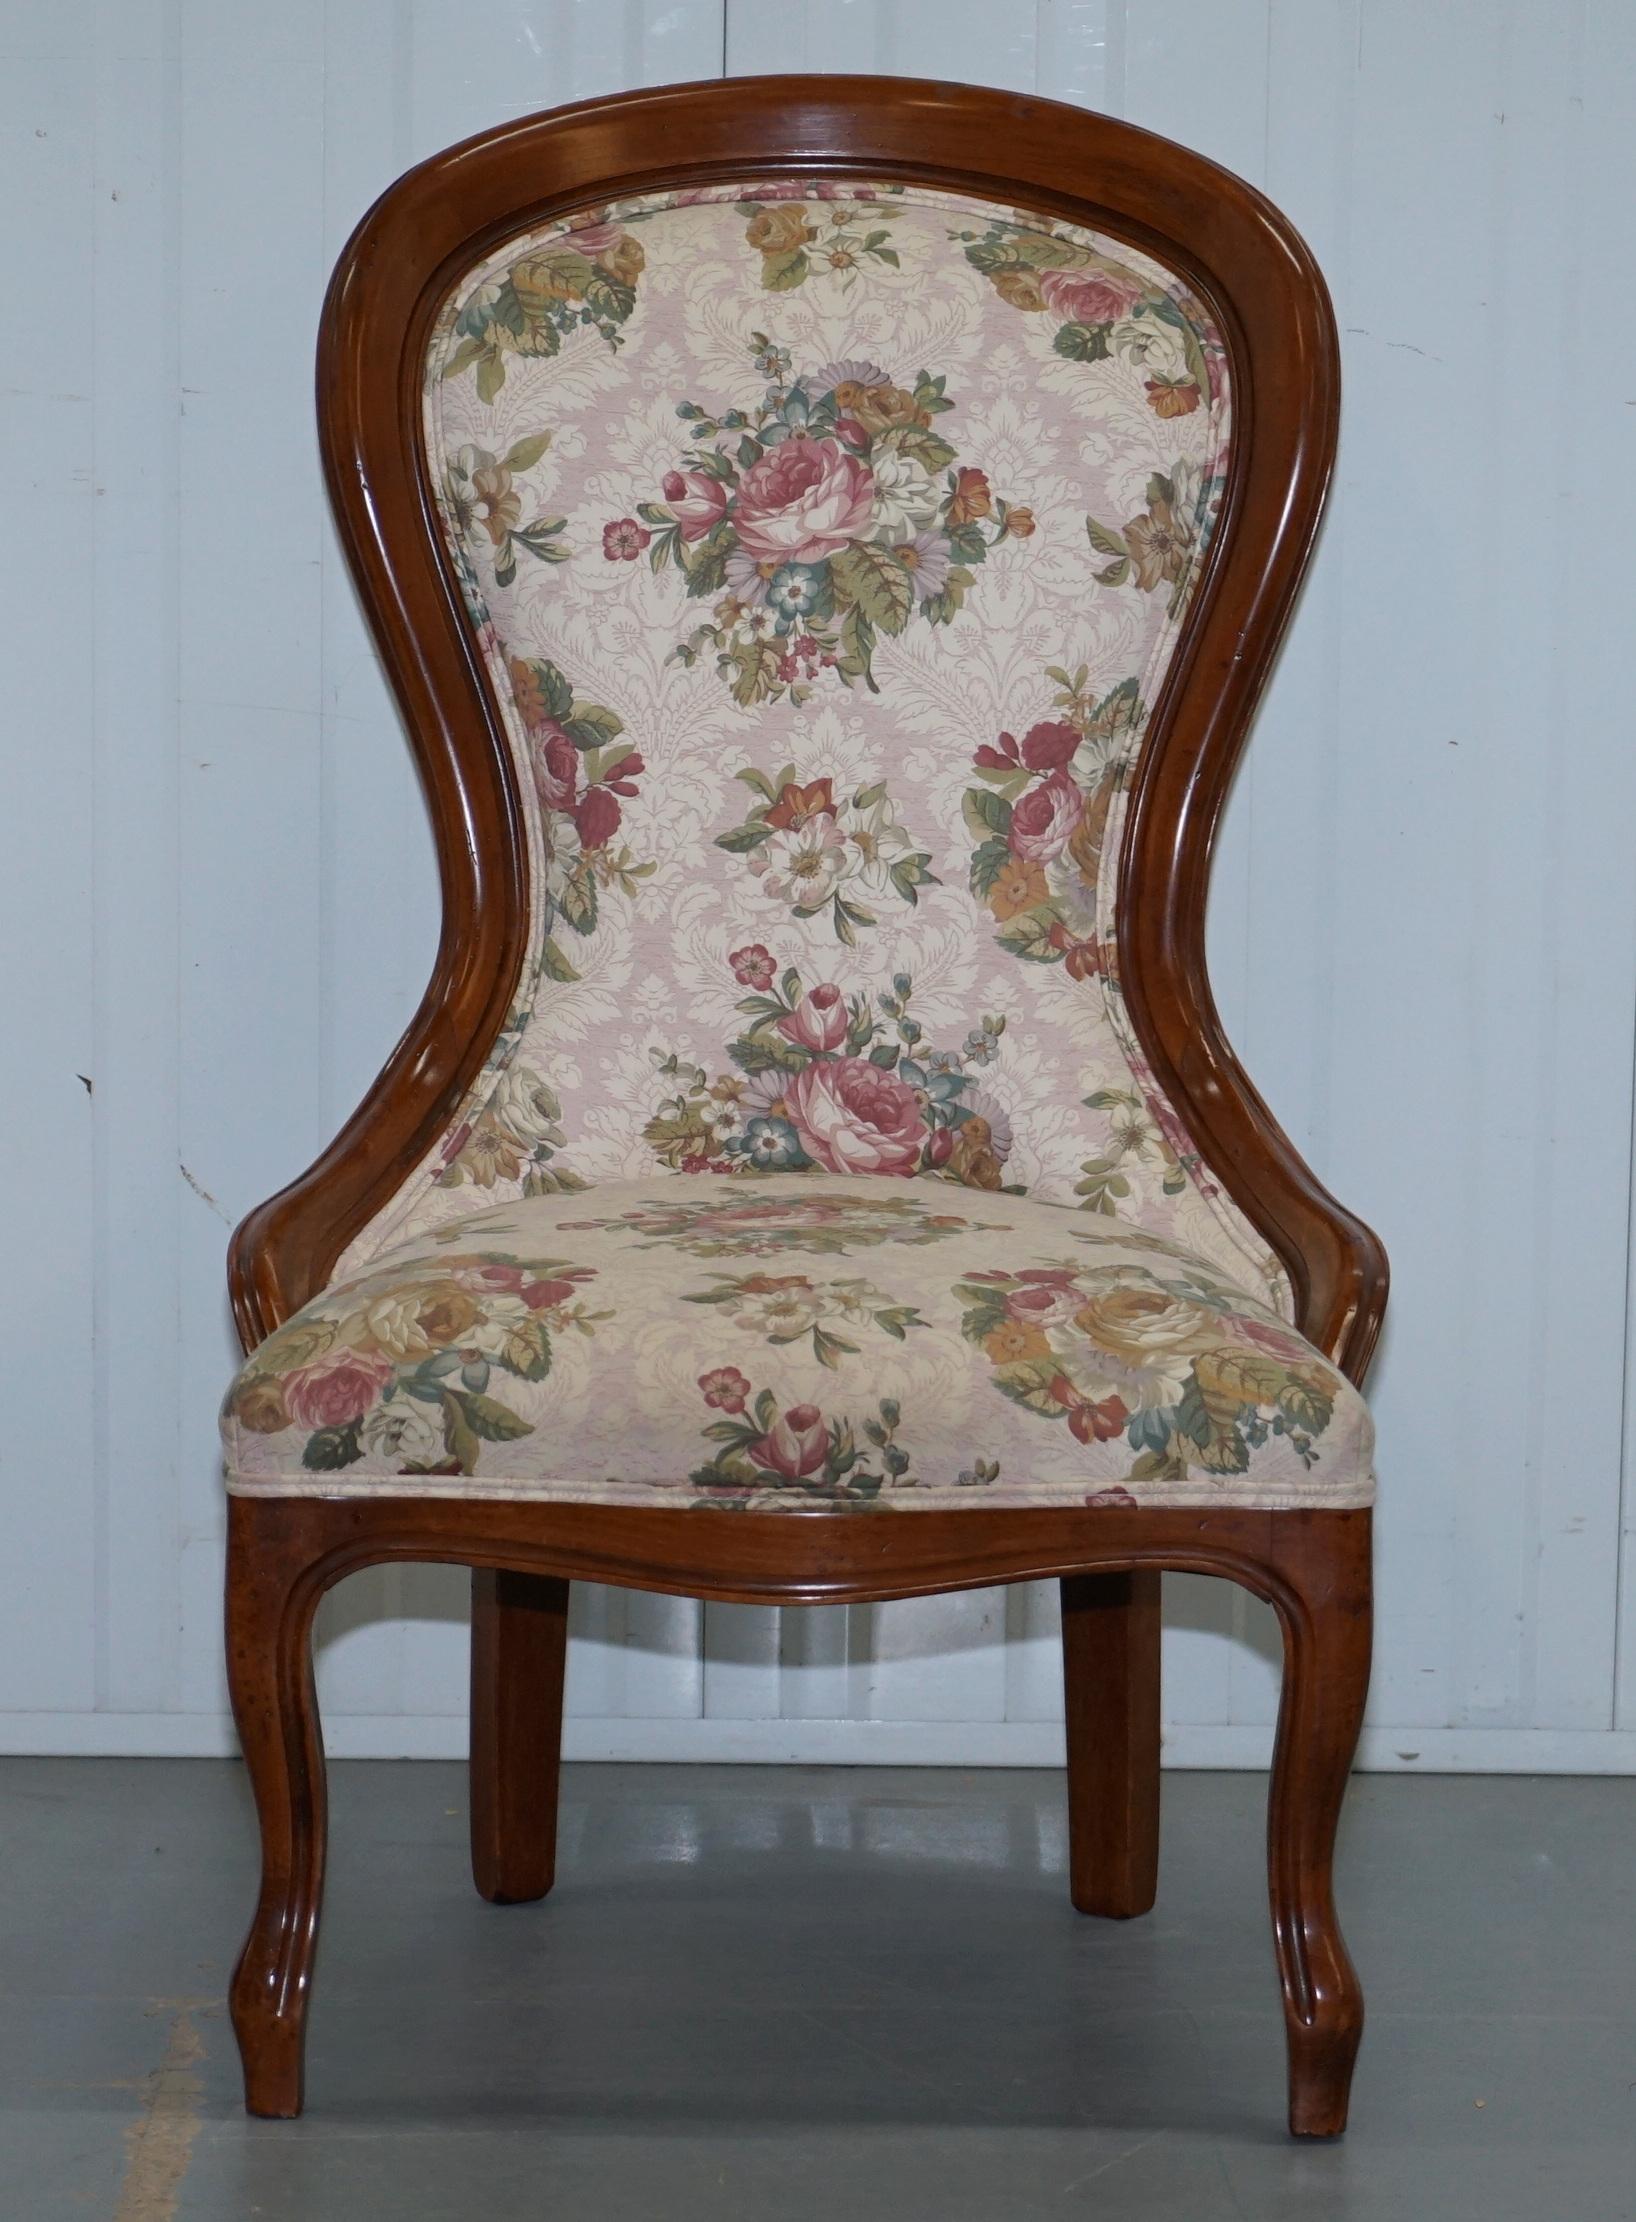 We are delighted to offer for sale this stunning medallion backed solid walnut Victorian Nursing chair with floral upholstery

A good looking decorative and very comfortable little chair in excellent condition throughout as you can see in the